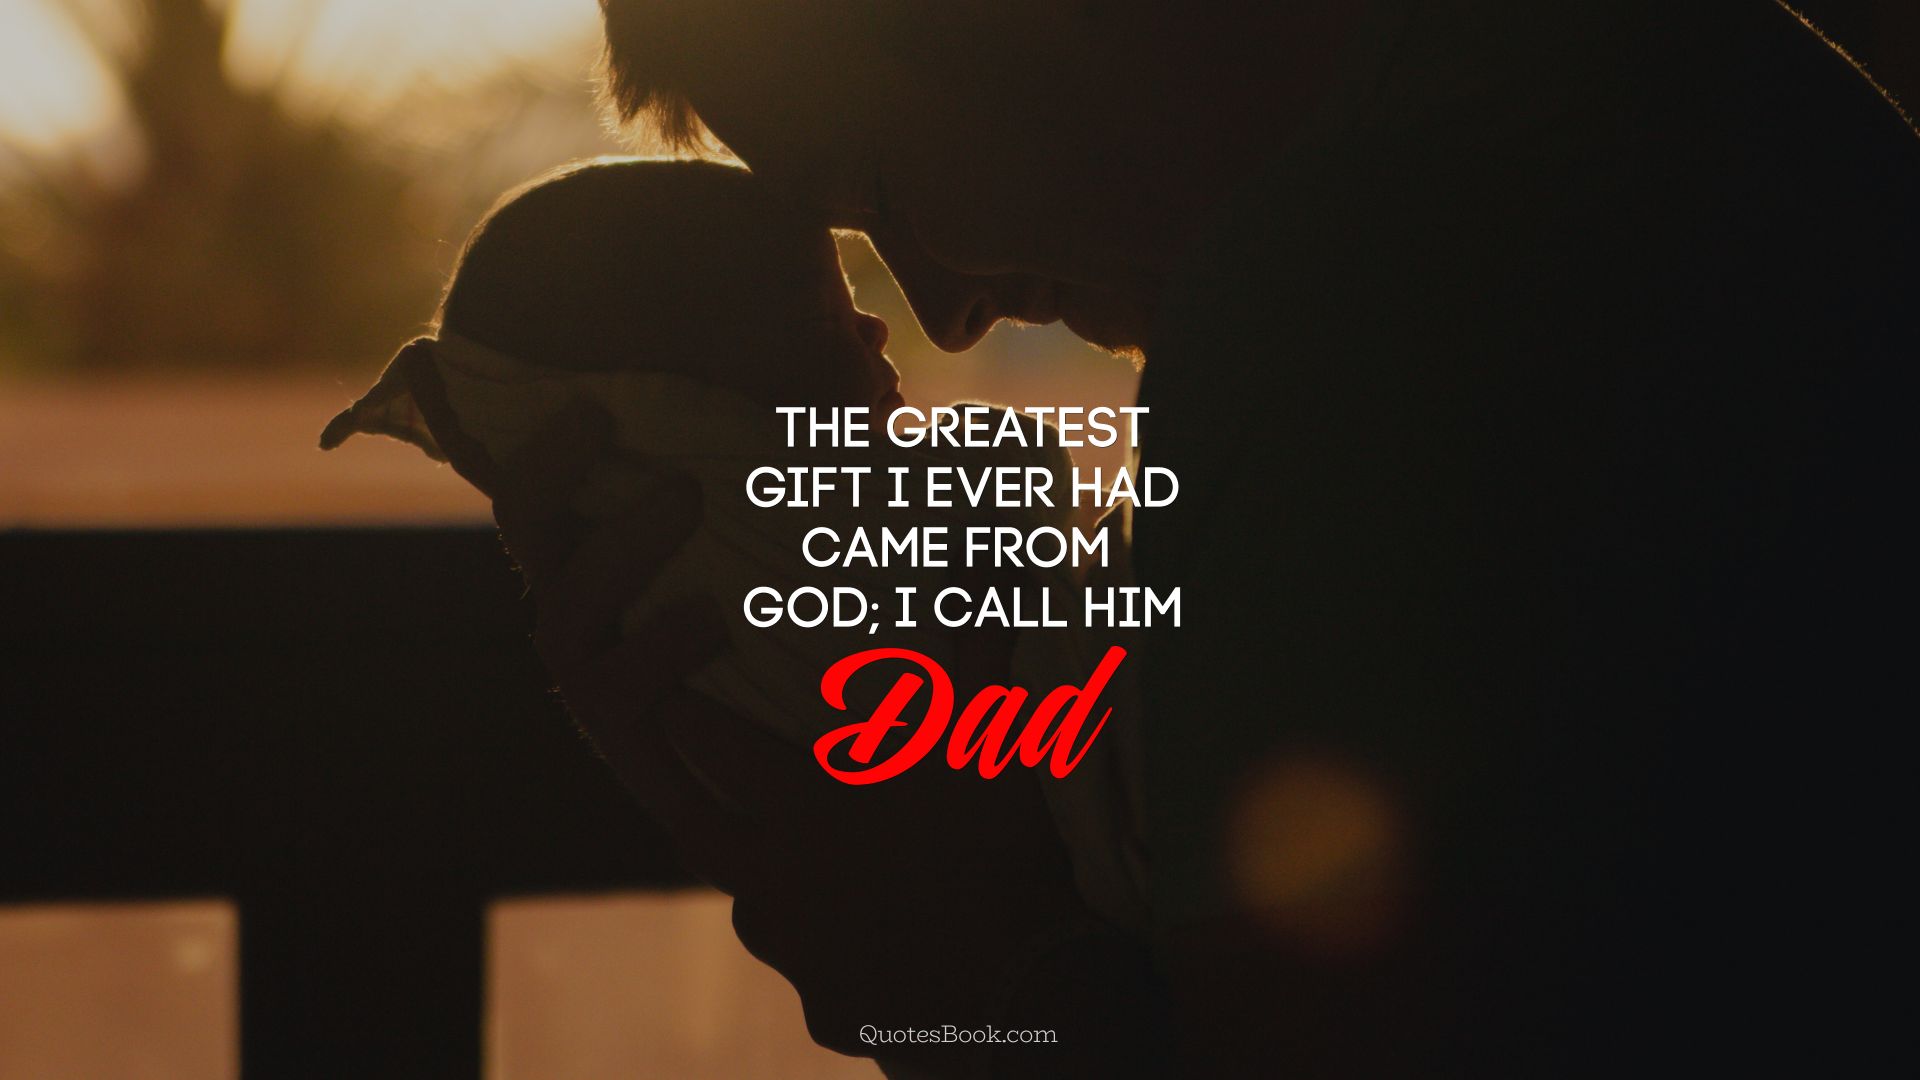 The greatest gift I ever had came from God I call him Dad!
